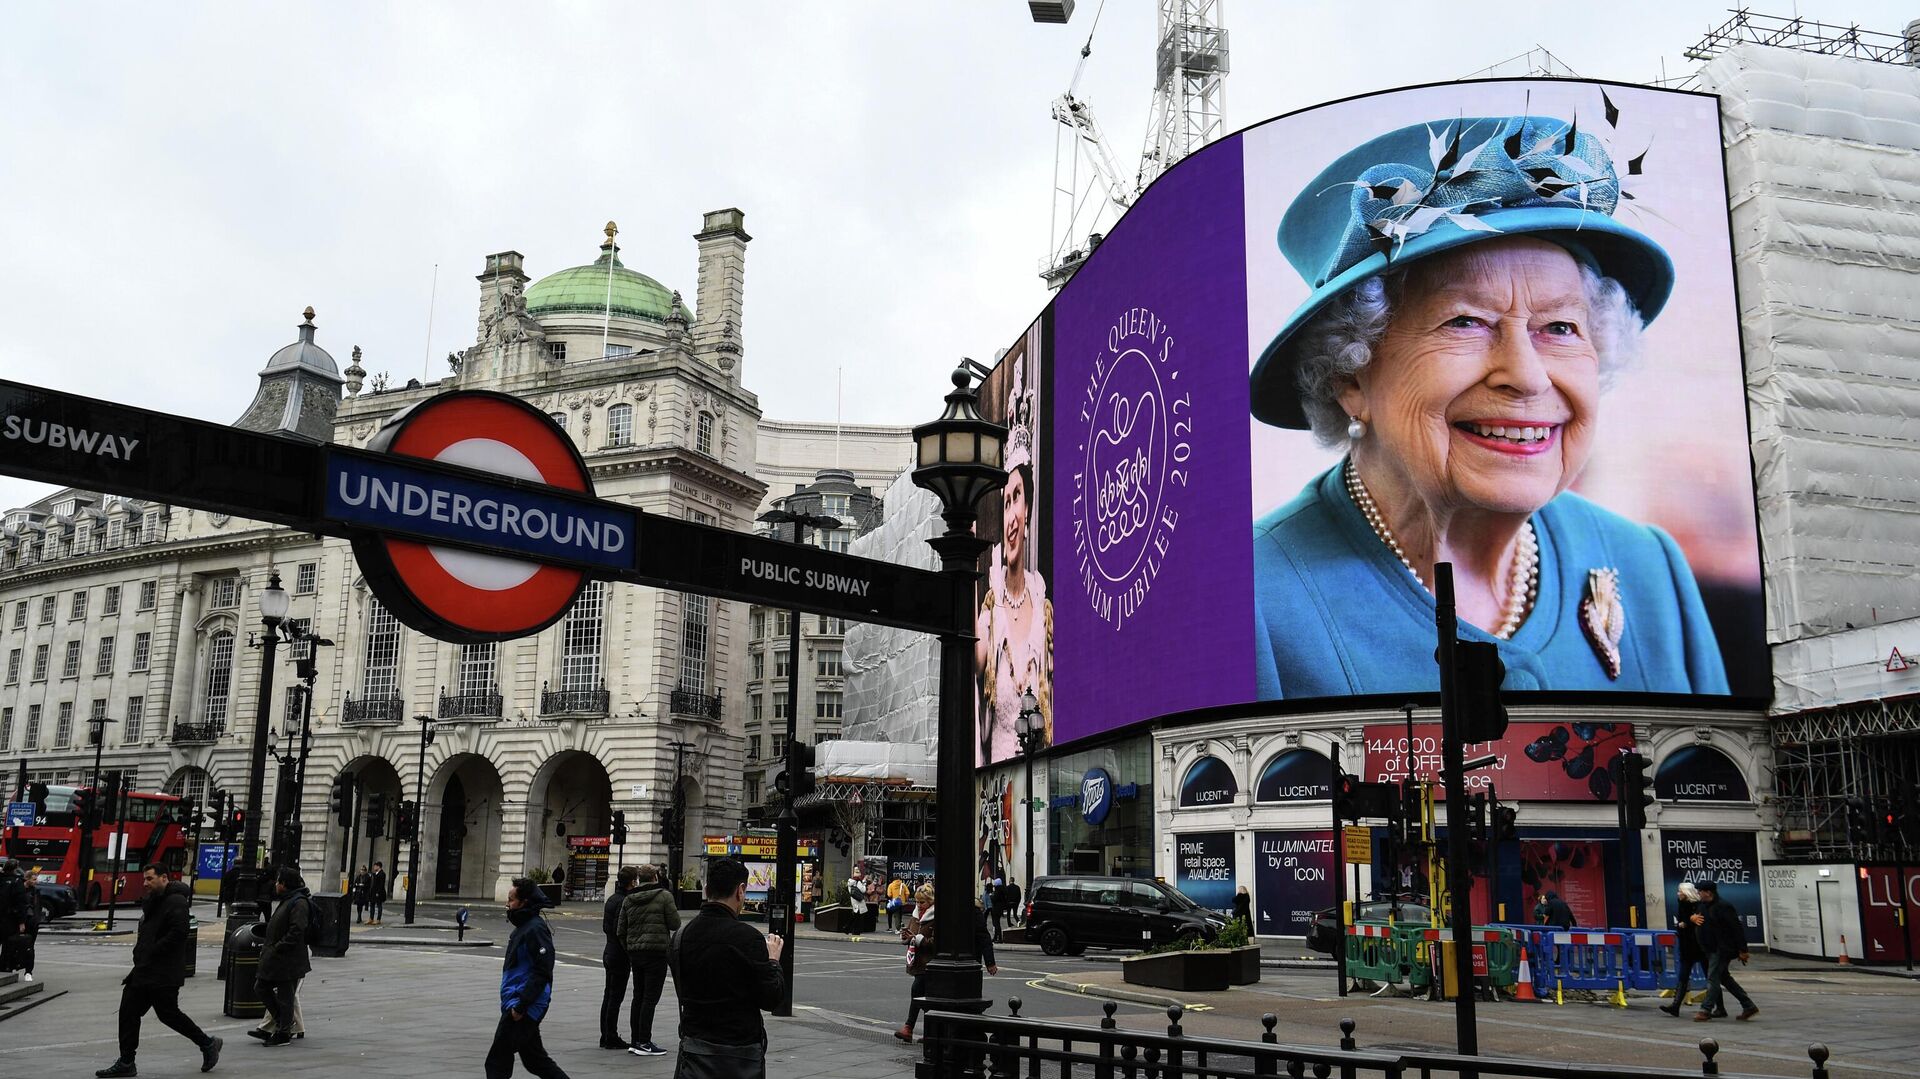 Images of Britain's Queen Elizabeth II are displayed on the big digital screens at Piccadilly Circus in central London on February 6, 2022, to mark the start of Her Majesty's Platinum Jubilee Year - Sputnik International, 1920, 16.05.2022